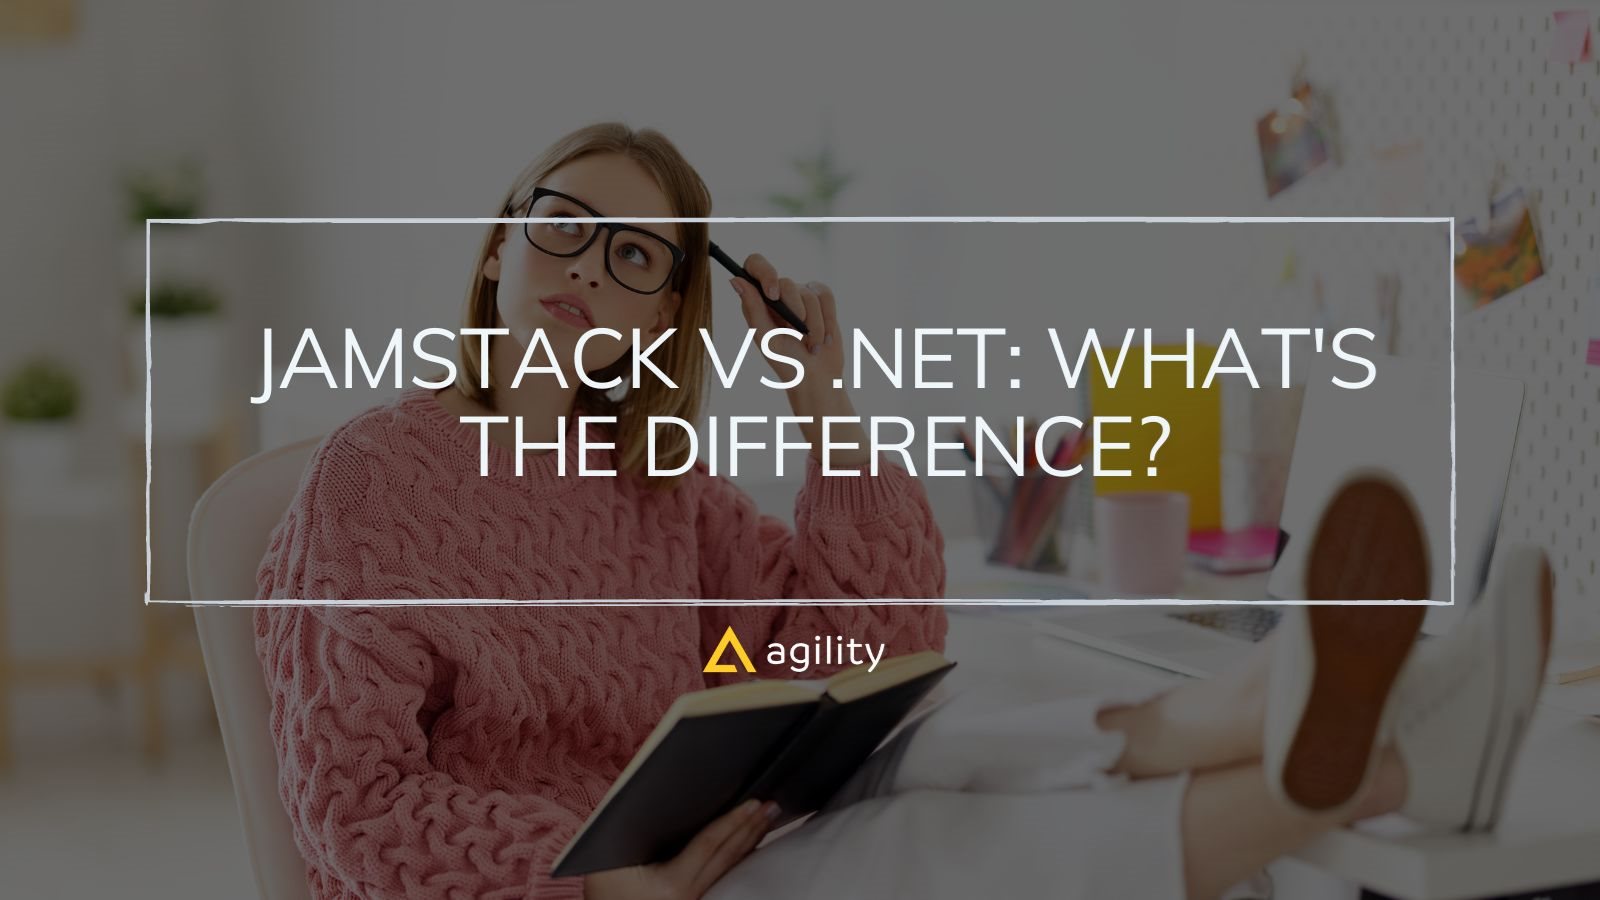 Jamstack vs .NET: What's the Difference?